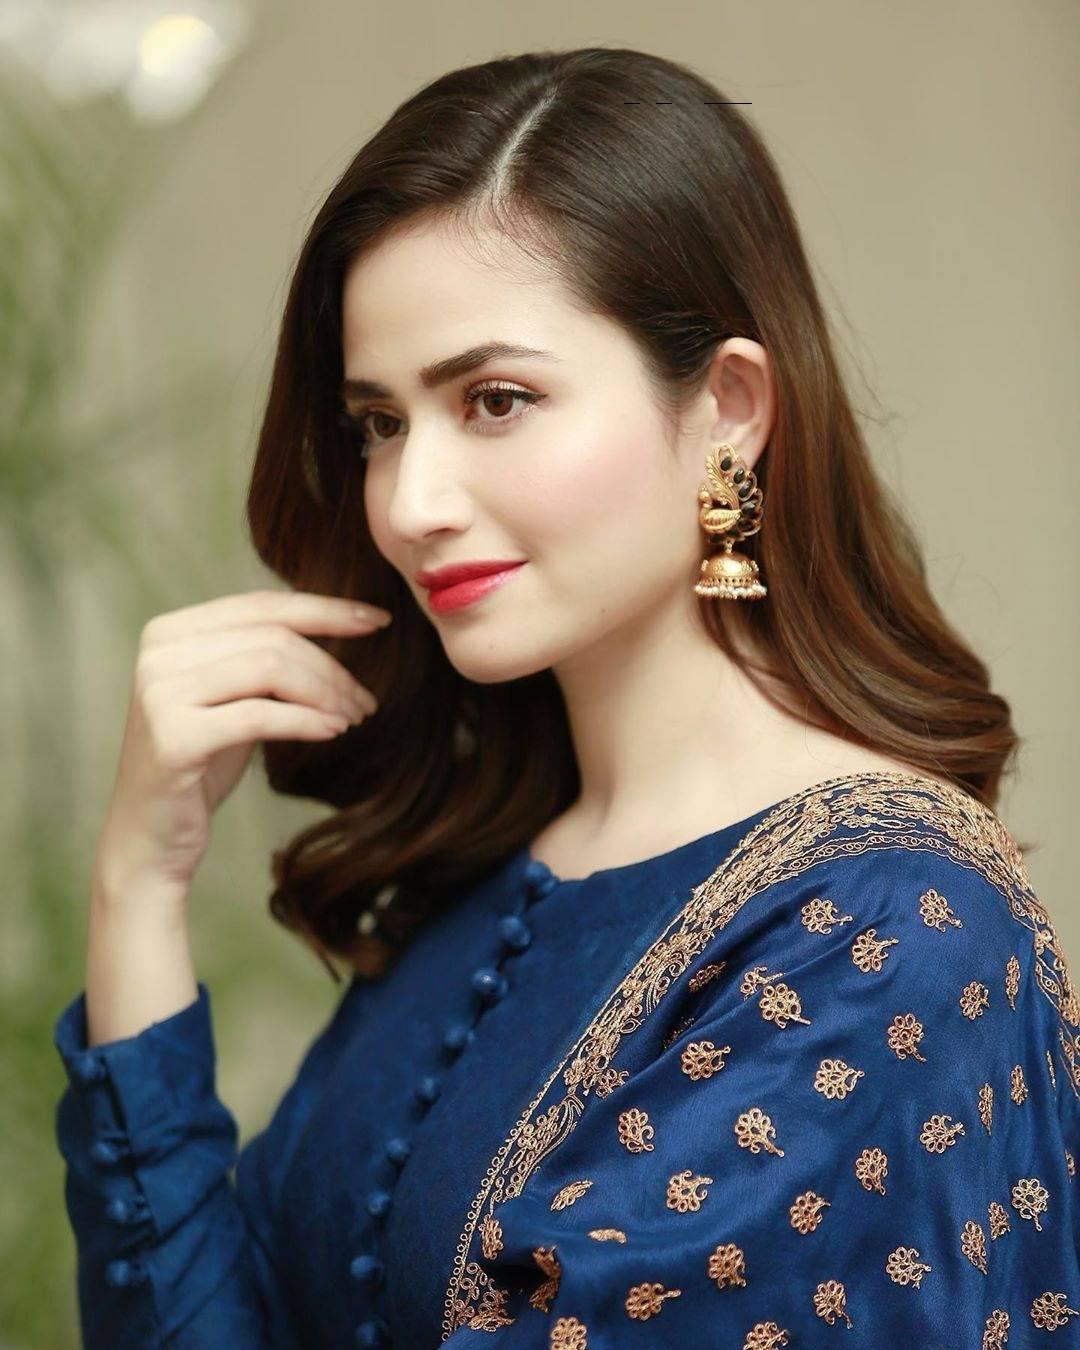 Sana Javed - Biography, Age, Husband, Career, and Much More!